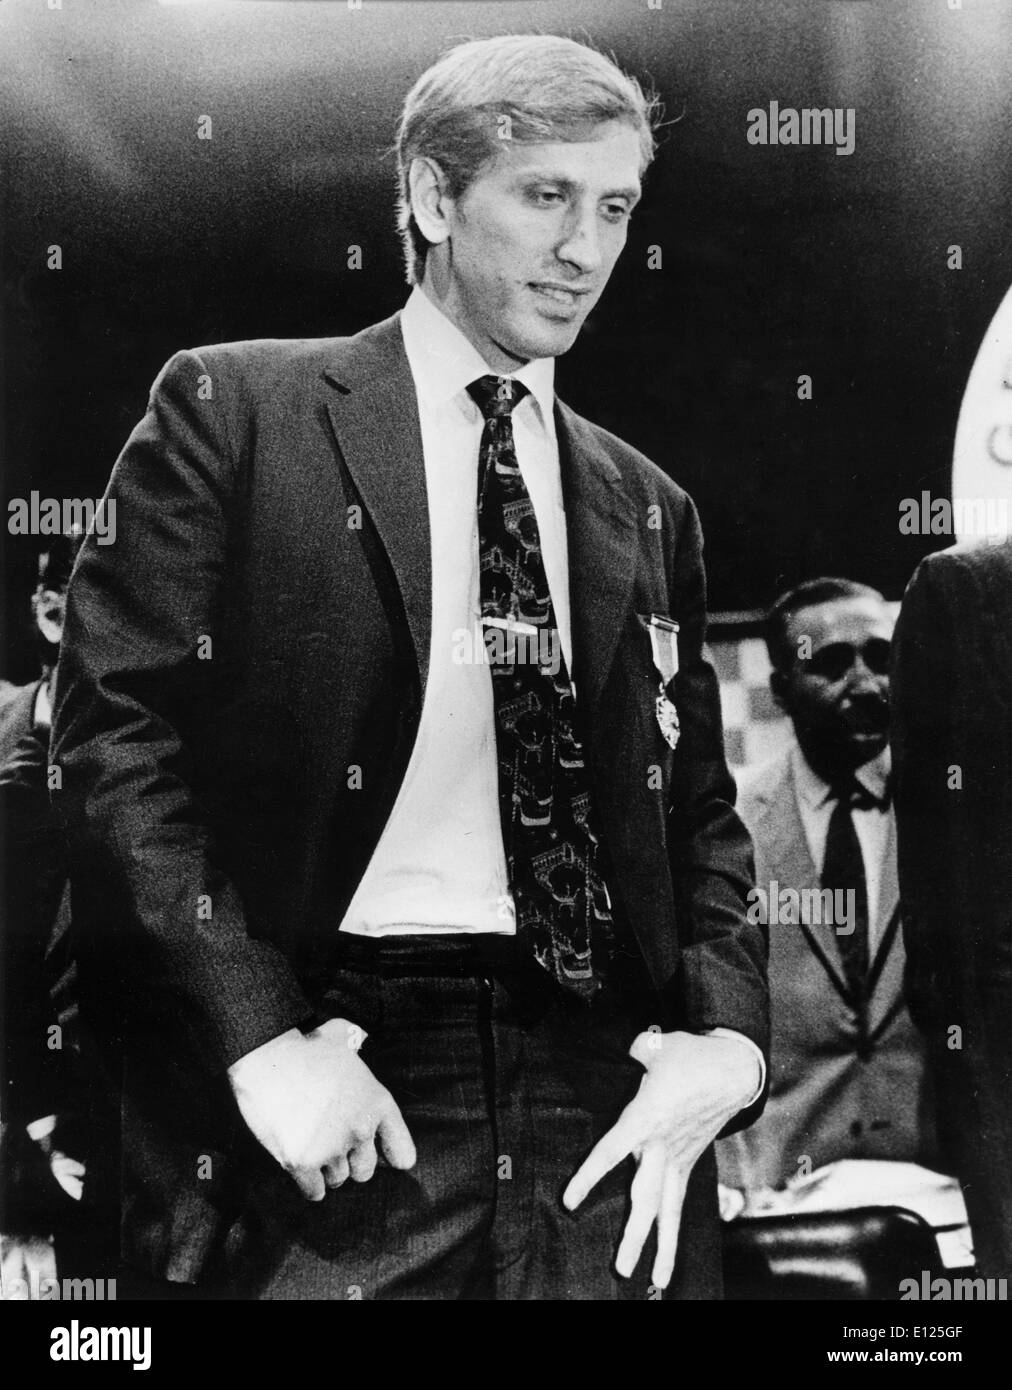 Jul 16, 2004; Buenos Aires, ARGENTINA; (File Photo 11/02/1971) Former world chess champion BOBBY FISCHER of the United States, arrested in Japan and wanted in his home country since 1992 for breaking an international embargo on the former Yugoslavia, is widely considered one of the sport's most brilliant minds of all times. In 1972, in Helsinki, the American genius broke 24 years of Soviet dominance by defeating Boris Spassky, and took home a world championship Stock Photo